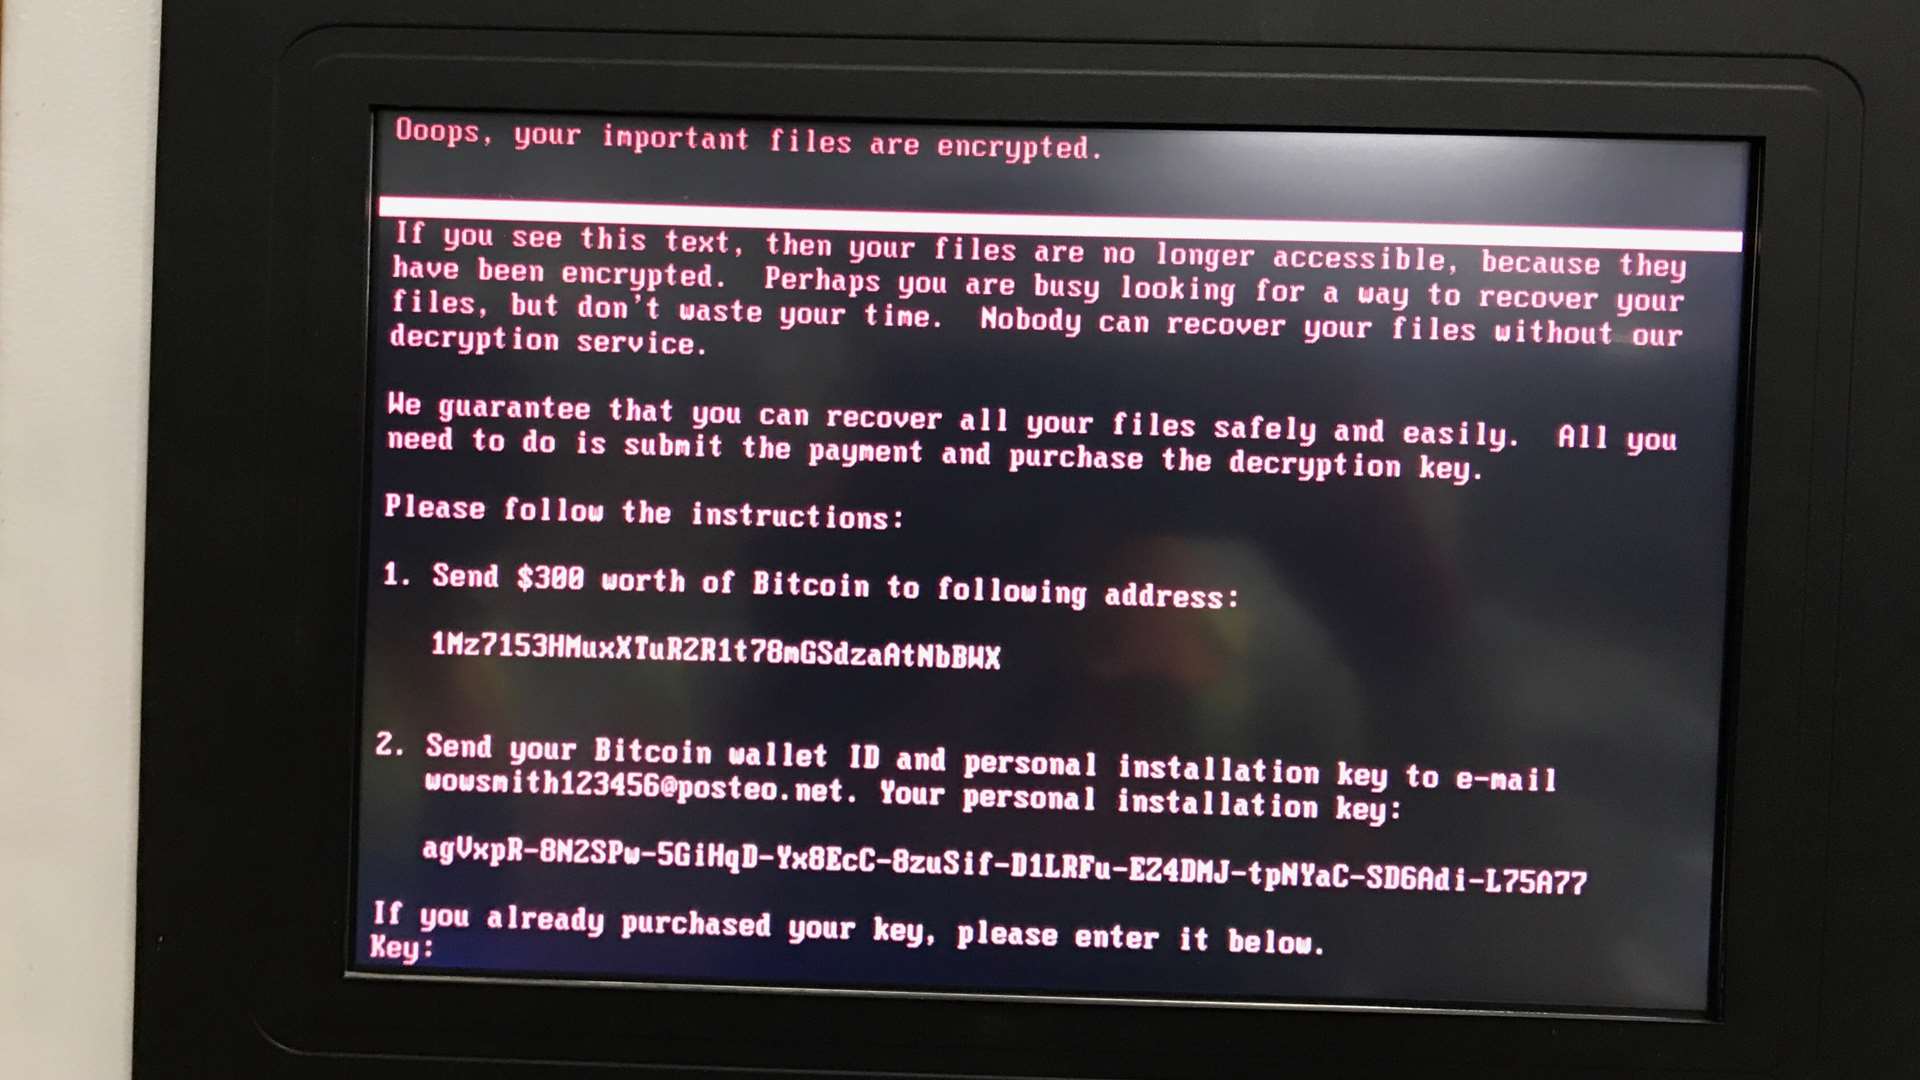 The Ransomware cyber attack message came up on computers at the TNT depot.